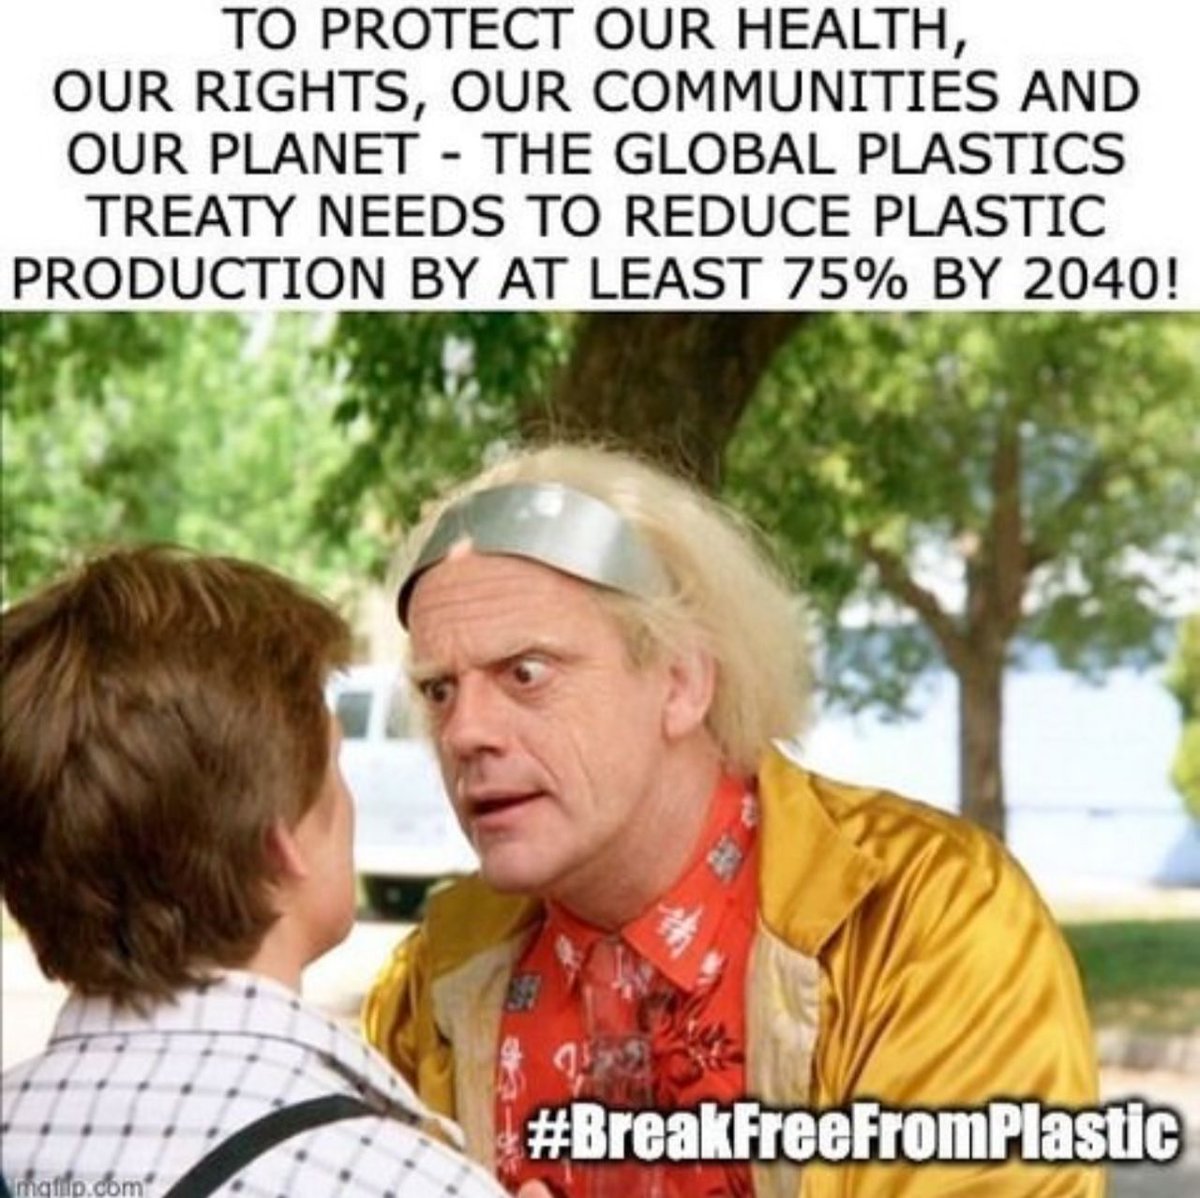 People, the planet and our climate demand a strong #PlasticsTreaty. That's why we are calling on African goverments to deliver a treaty that cuts plastic production by at least 75% by 2040.

#breakfreefromplastic  #climatechange #keeptheearthclean